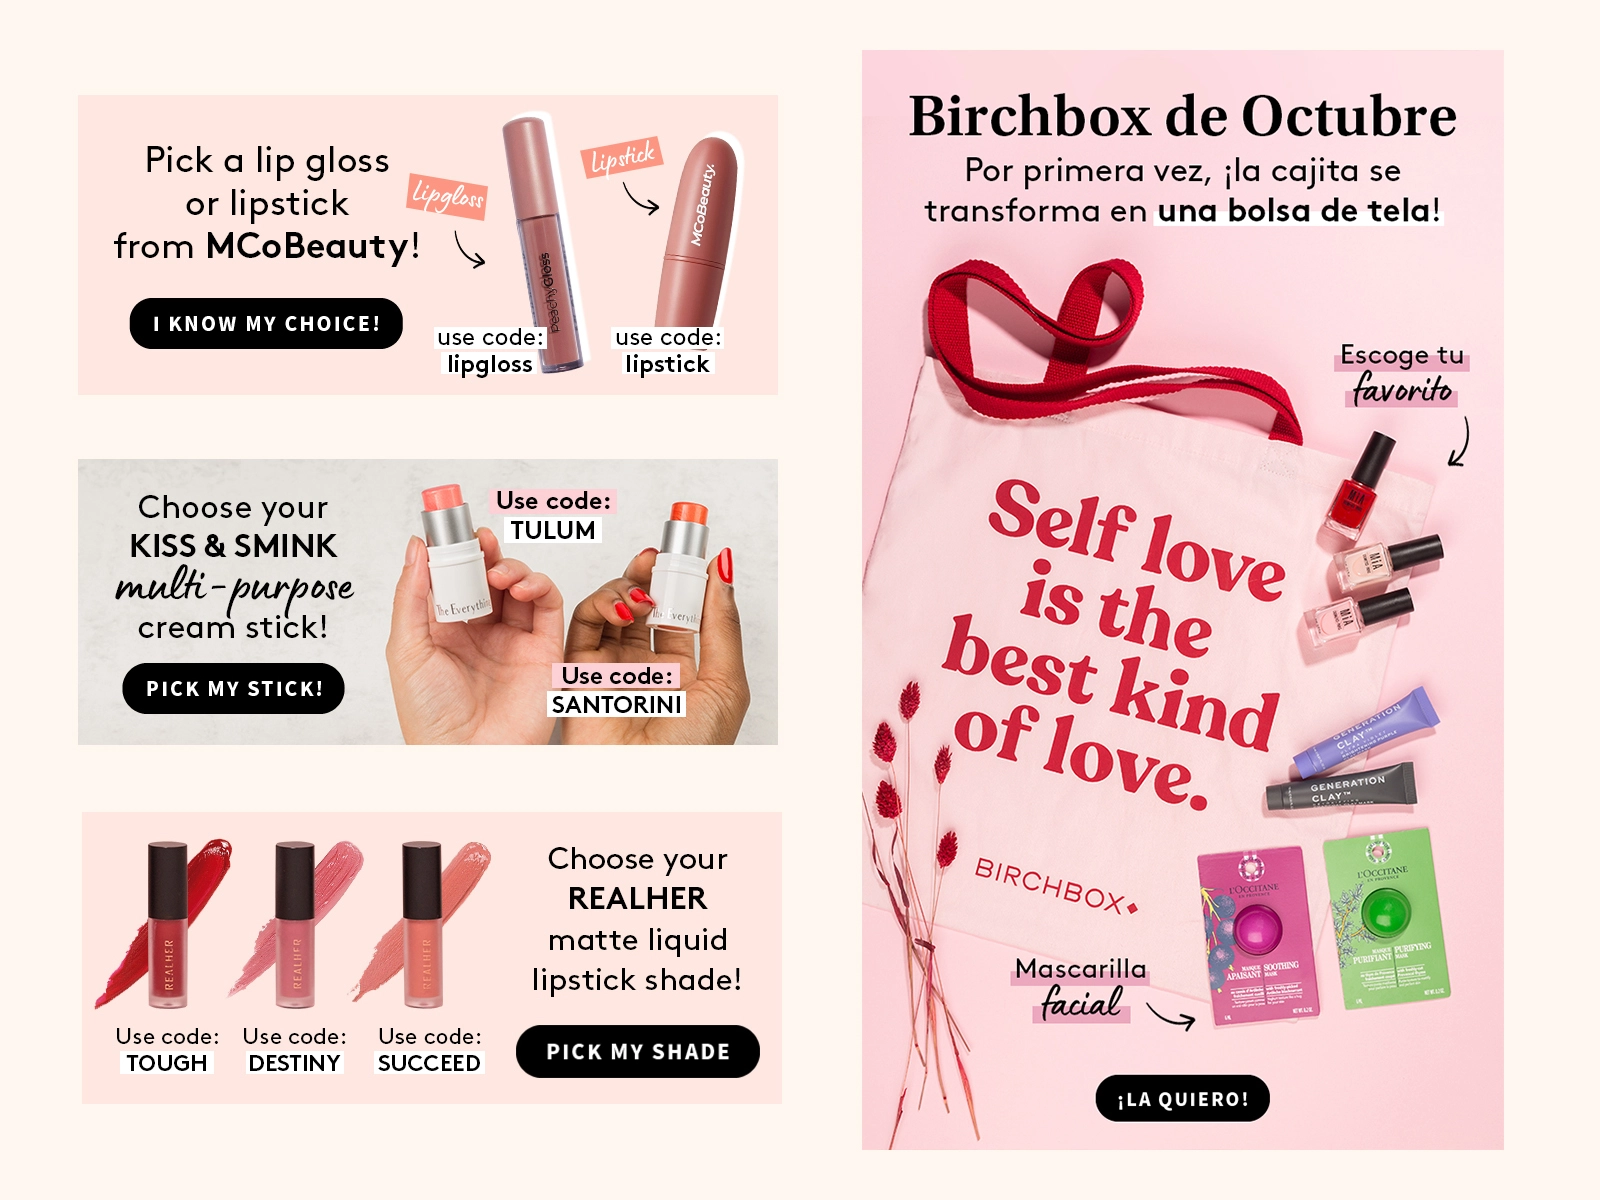 Makeup newsletter and banner design promoting new monthly campaign